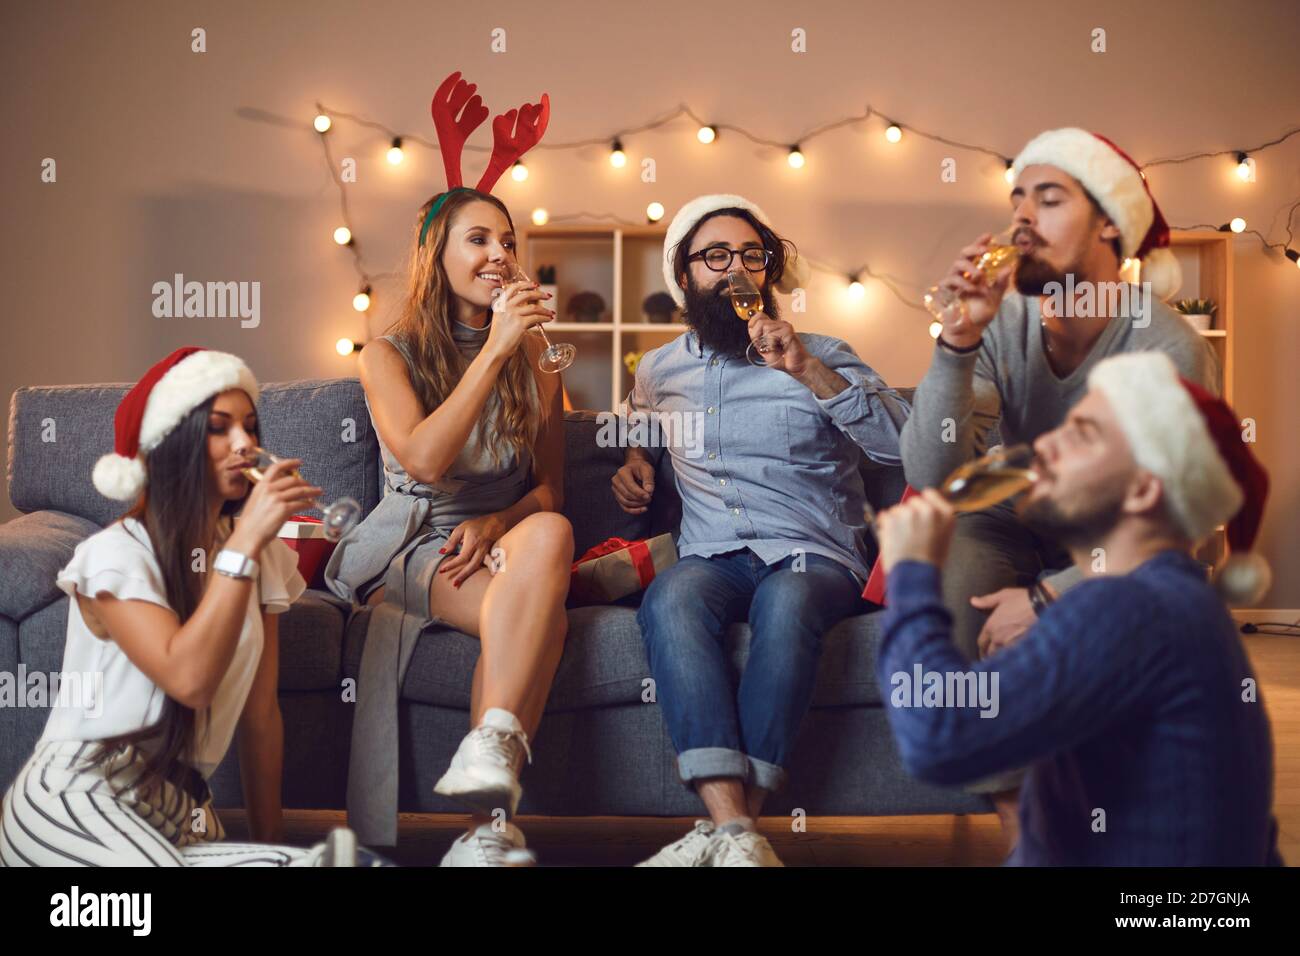 Group of young friends drinking champagne sitting on sofa and floor during Christmas party at home Stock Photo